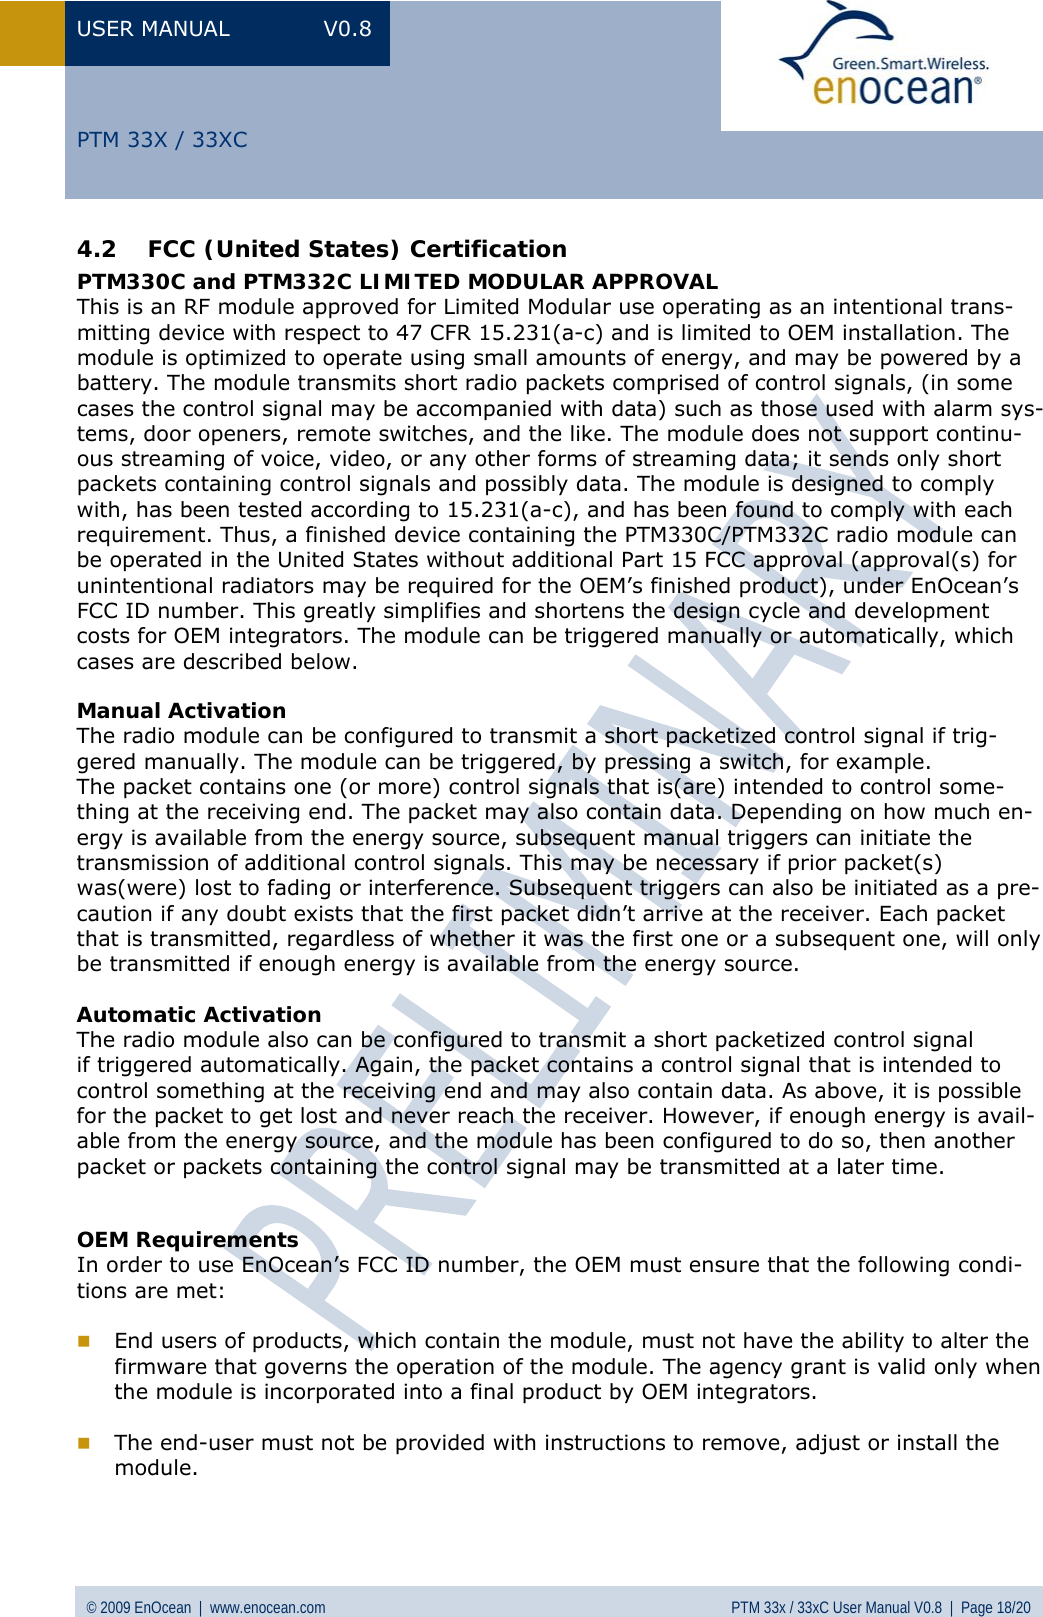 USER MANUAL V0.8 © 2009 EnOcean  |  www.enocean.com  PTM 33x / 33xC User Manual V0.8  |  Page 18/20   PTM 33X / 33XC 4.2 FCC (United States) Certification  PTM330C and PTM332C LIMITED MODULAR APPROVAL This is an RF module approved for Limited Modular use operating as an intentional trans-mitting device with respect to 47 CFR 15.231(a-c) and is limited to OEM installation. The module is optimized to operate using small amounts of energy, and may be powered by a battery. The module transmits short radio packets comprised of control signals, (in some cases the control signal may be accompanied with data) such as those used with alarm sys-tems, door openers, remote switches, and the like. The module does not support continu-ous streaming of voice, video, or any other forms of streaming data; it sends only short packets containing control signals and possibly data. The module is designed to comply with, has been tested according to 15.231(a-c), and has been found to comply with each requirement. Thus, a finished device containing the PTM330C/PTM332C radio module can be operated in the United States without additional Part 15 FCC approval (approval(s) for unintentional radiators may be required for the OEM’s finished product), under EnOcean’s FCC ID number. This greatly simplifies and shortens the design cycle and development costs for OEM integrators. The module can be triggered manually or automatically, which cases are described below.  Manual Activation The radio module can be configured to transmit a short packetized control signal if trig-gered manually. The module can be triggered, by pressing a switch, for example. The packet contains one (or more) control signals that is(are) intended to control some-thing at the receiving end. The packet may also contain data. Depending on how much en-ergy is available from the energy source, subsequent manual triggers can initiate the transmission of additional control signals. This may be necessary if prior packet(s) was(were) lost to fading or interference. Subsequent triggers can also be initiated as a pre-caution if any doubt exists that the first packet didn’t arrive at the receiver. Each packet that is transmitted, regardless of whether it was the first one or a subsequent one, will only be transmitted if enough energy is available from the energy source.  Automatic Activation The radio module also can be configured to transmit a short packetized control signal if triggered automatically. Again, the packet contains a control signal that is intended to control something at the receiving end and may also contain data. As above, it is possible for the packet to get lost and never reach the receiver. However, if enough energy is avail-able from the energy source, and the module has been configured to do so, then another packet or packets containing the control signal may be transmitted at a later time.   OEM Requirements In order to use EnOcean’s FCC ID number, the OEM must ensure that the following condi-tions are met:   End users of products, which contain the module, must not have the ability to alter the firmware that governs the operation of the module. The agency grant is valid only when the module is incorporated into a final product by OEM integrators.   The end-user must not be provided with instructions to remove, adjust or install the module.  